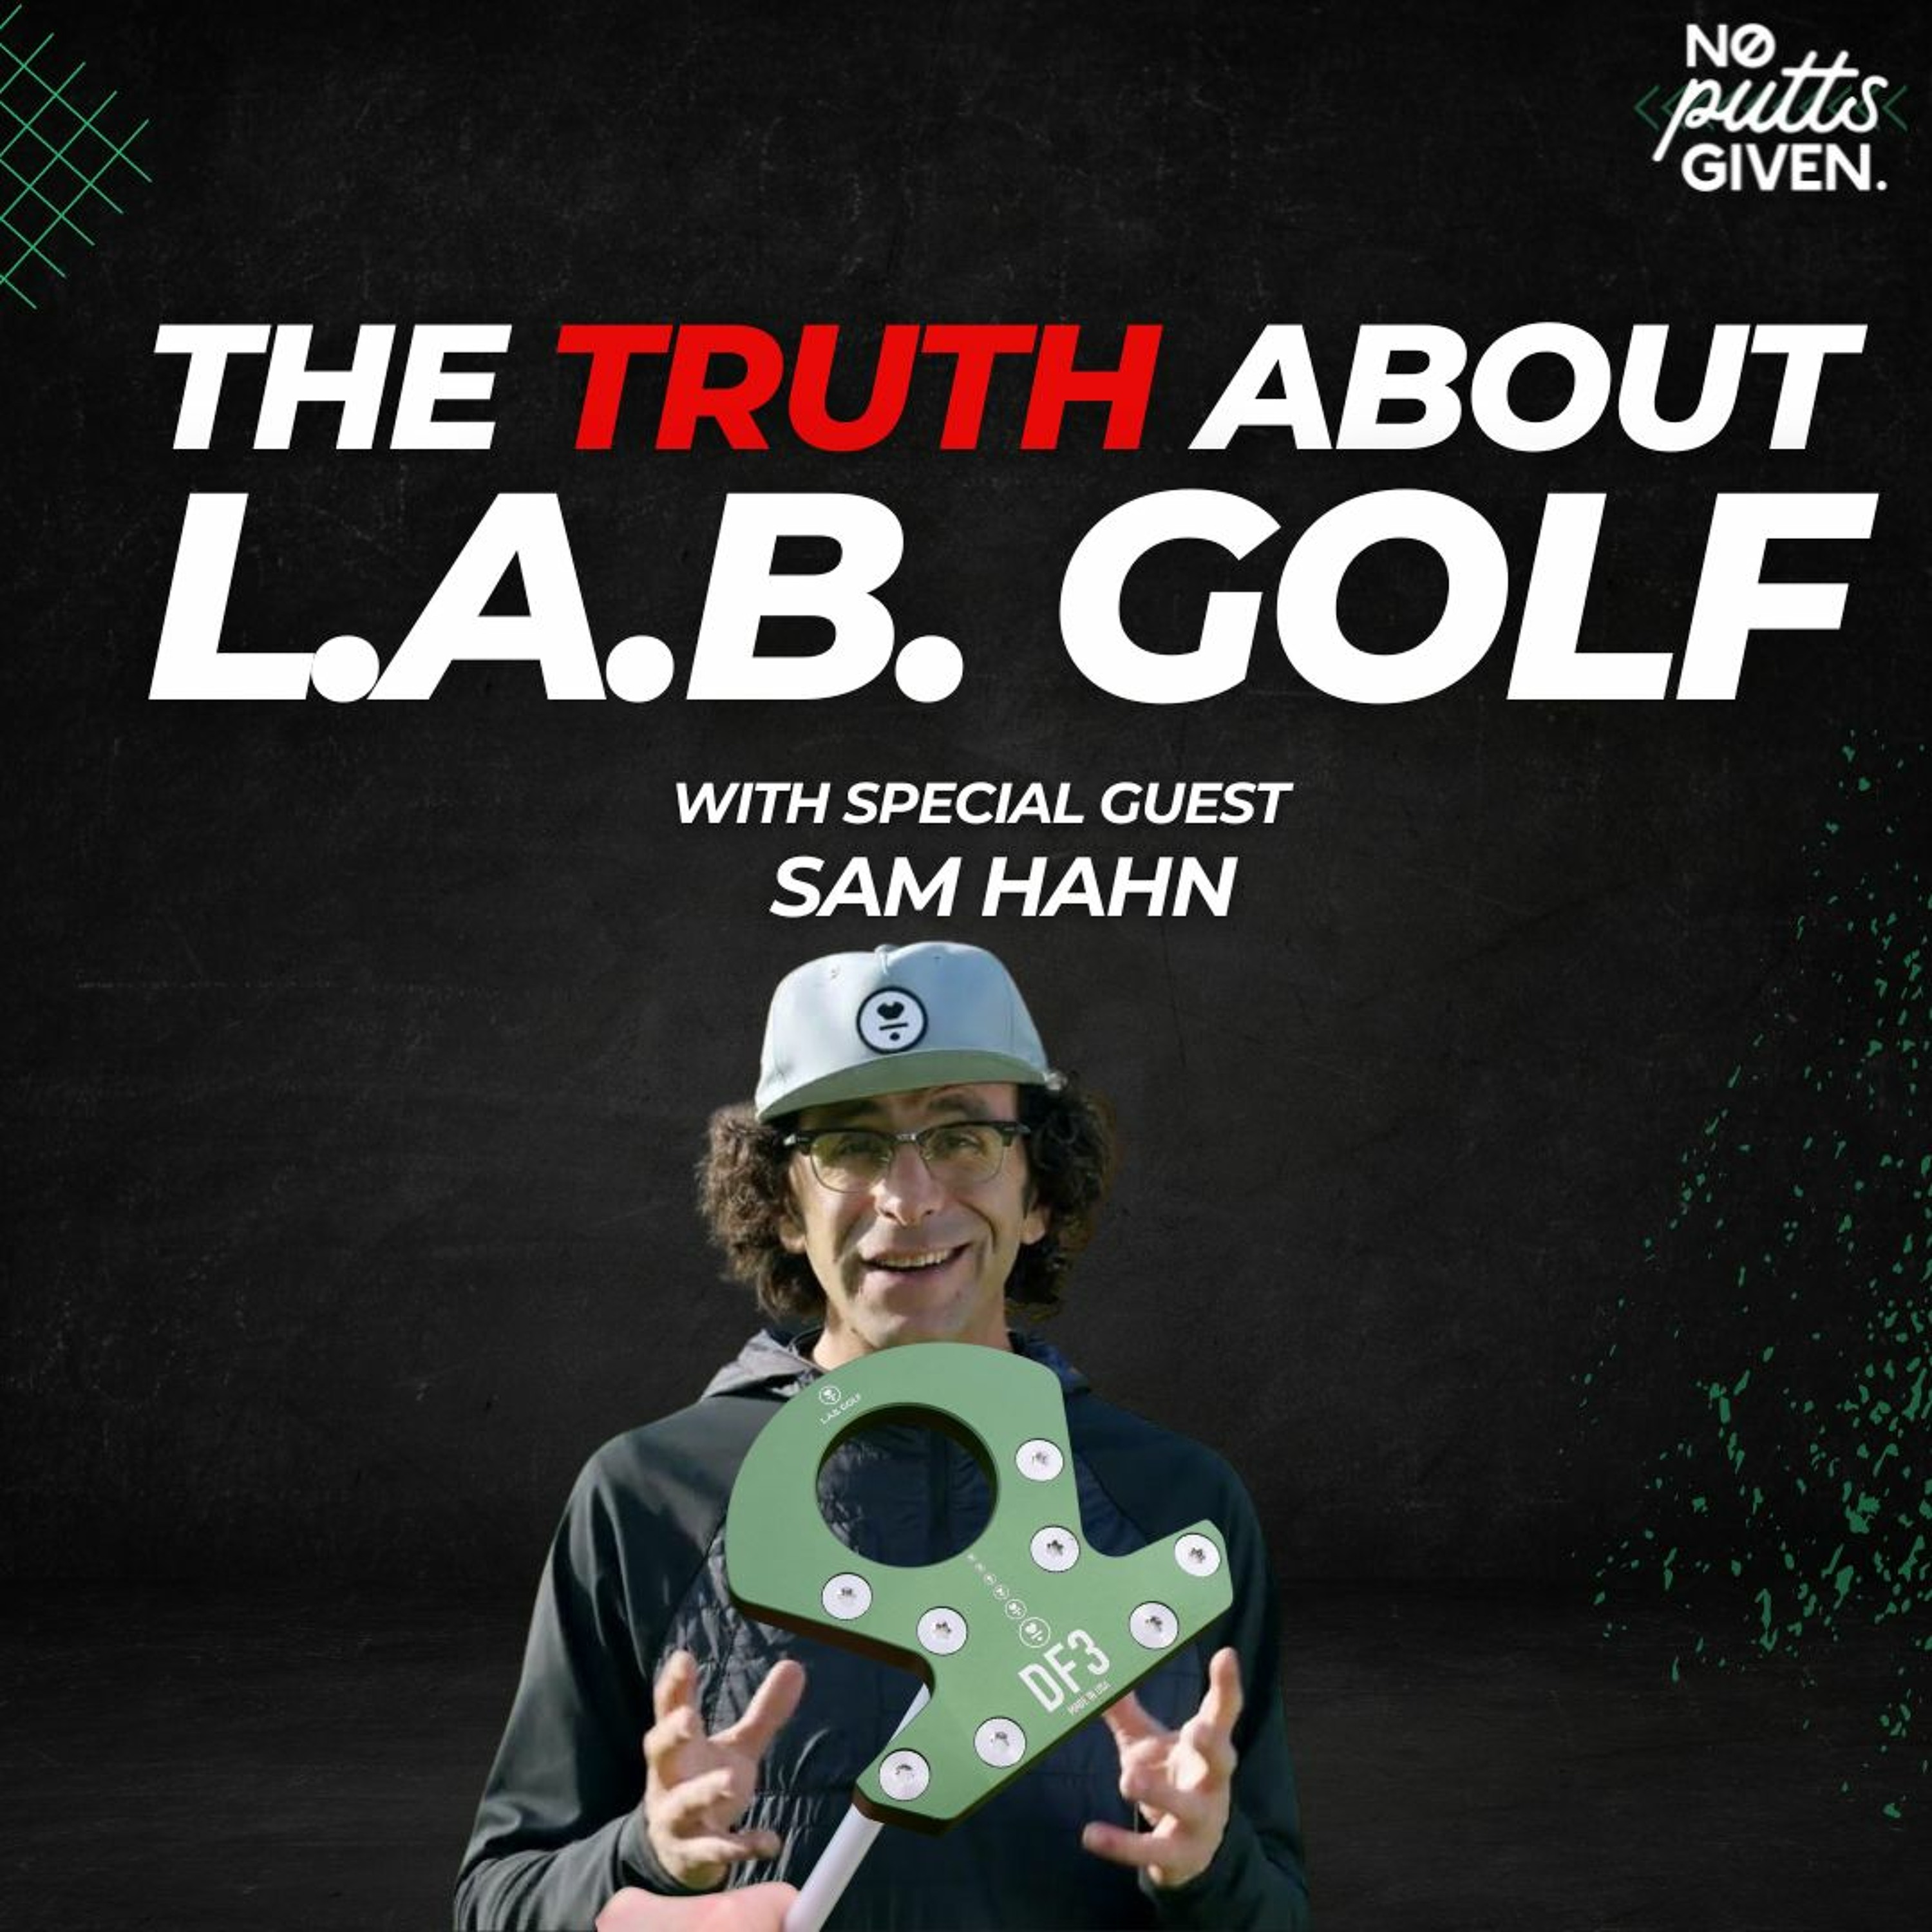 L.A.B. GOLF - Inside the Paint | Special No Putts Given